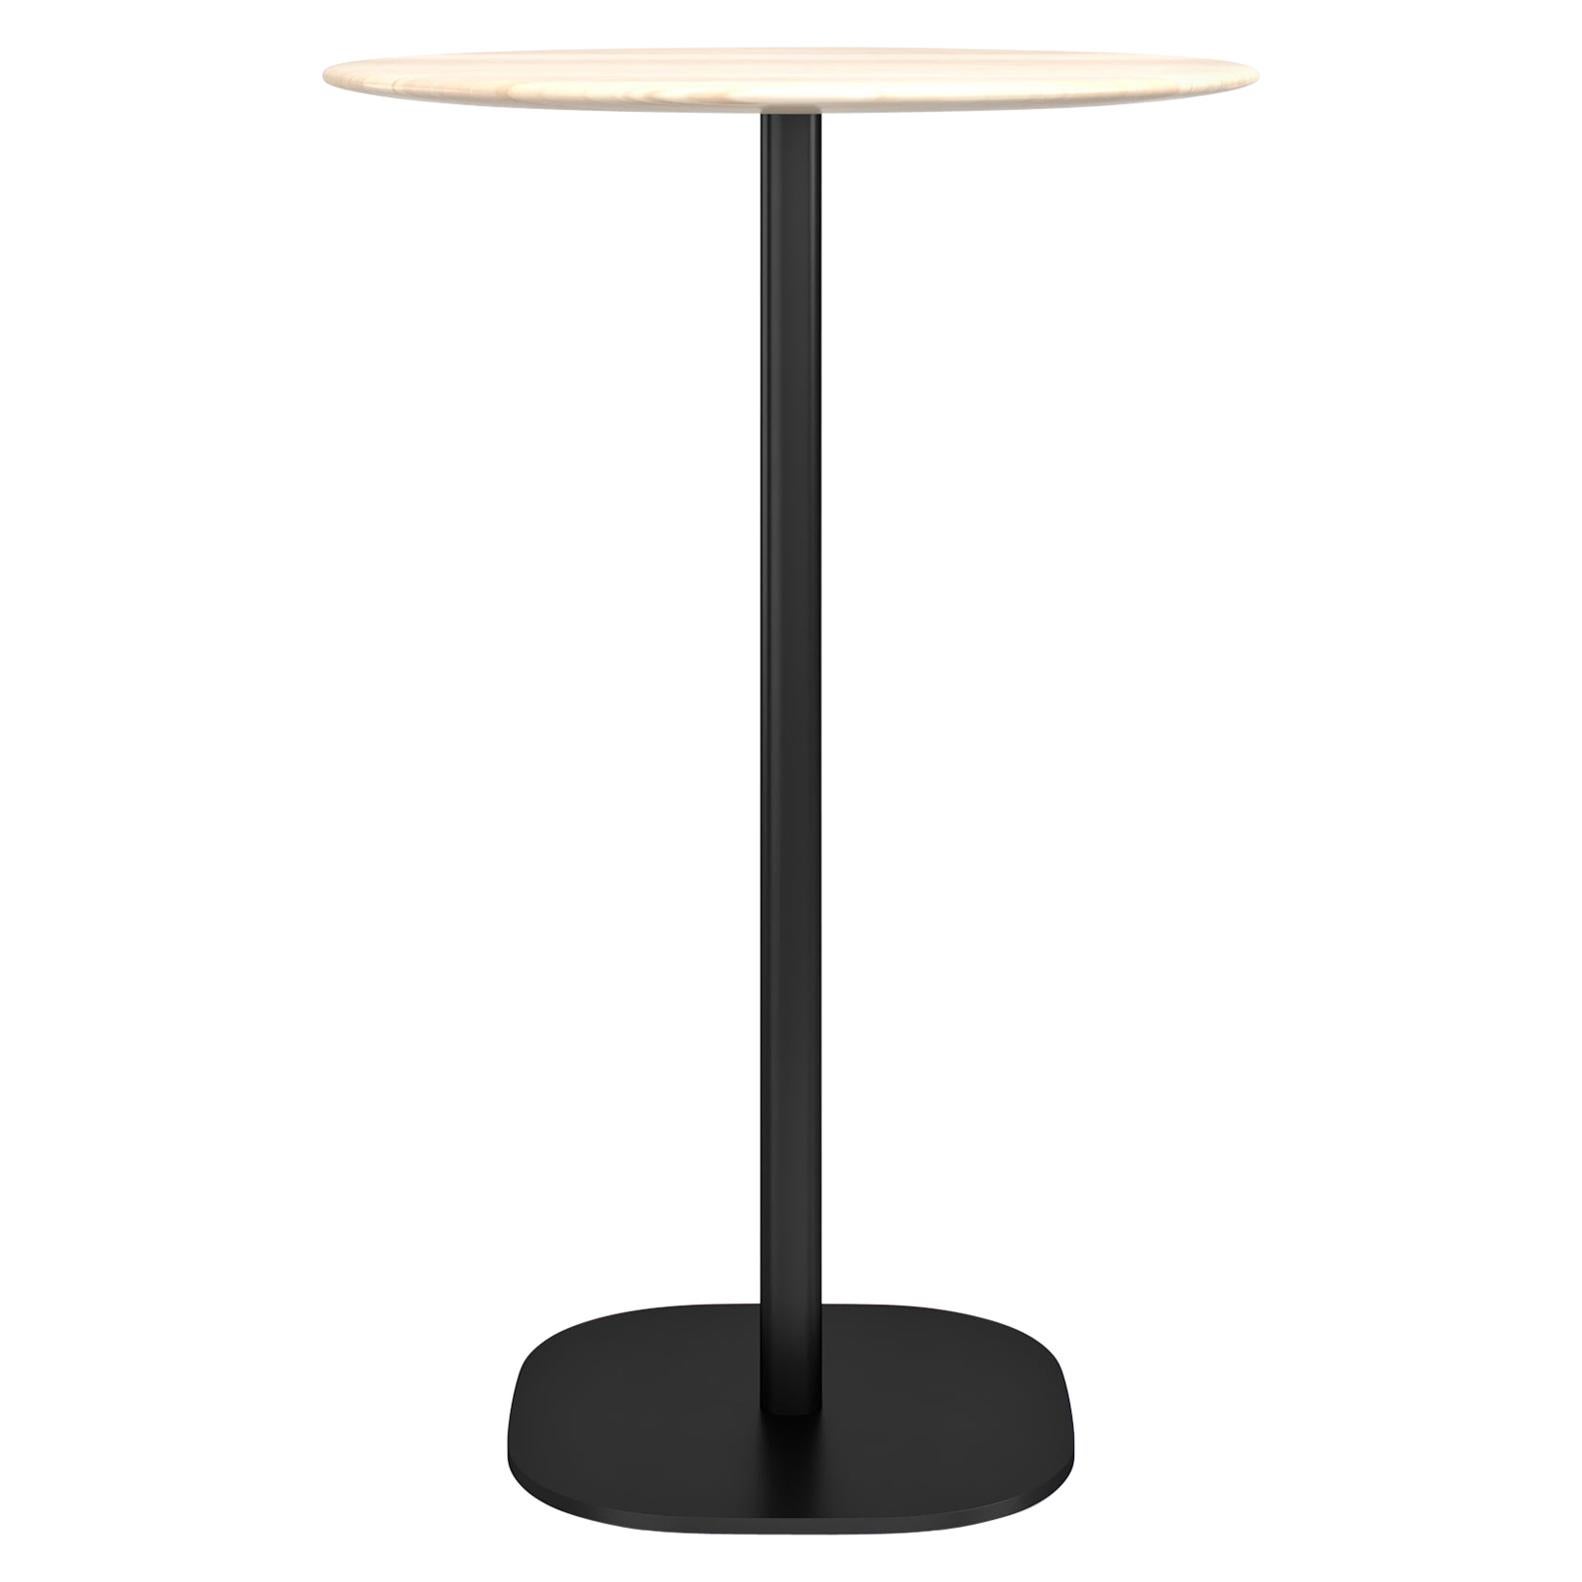 Emeco 2 Inch Large Round Bar Table with Black Legs & Wood Top by Jasper Morrison